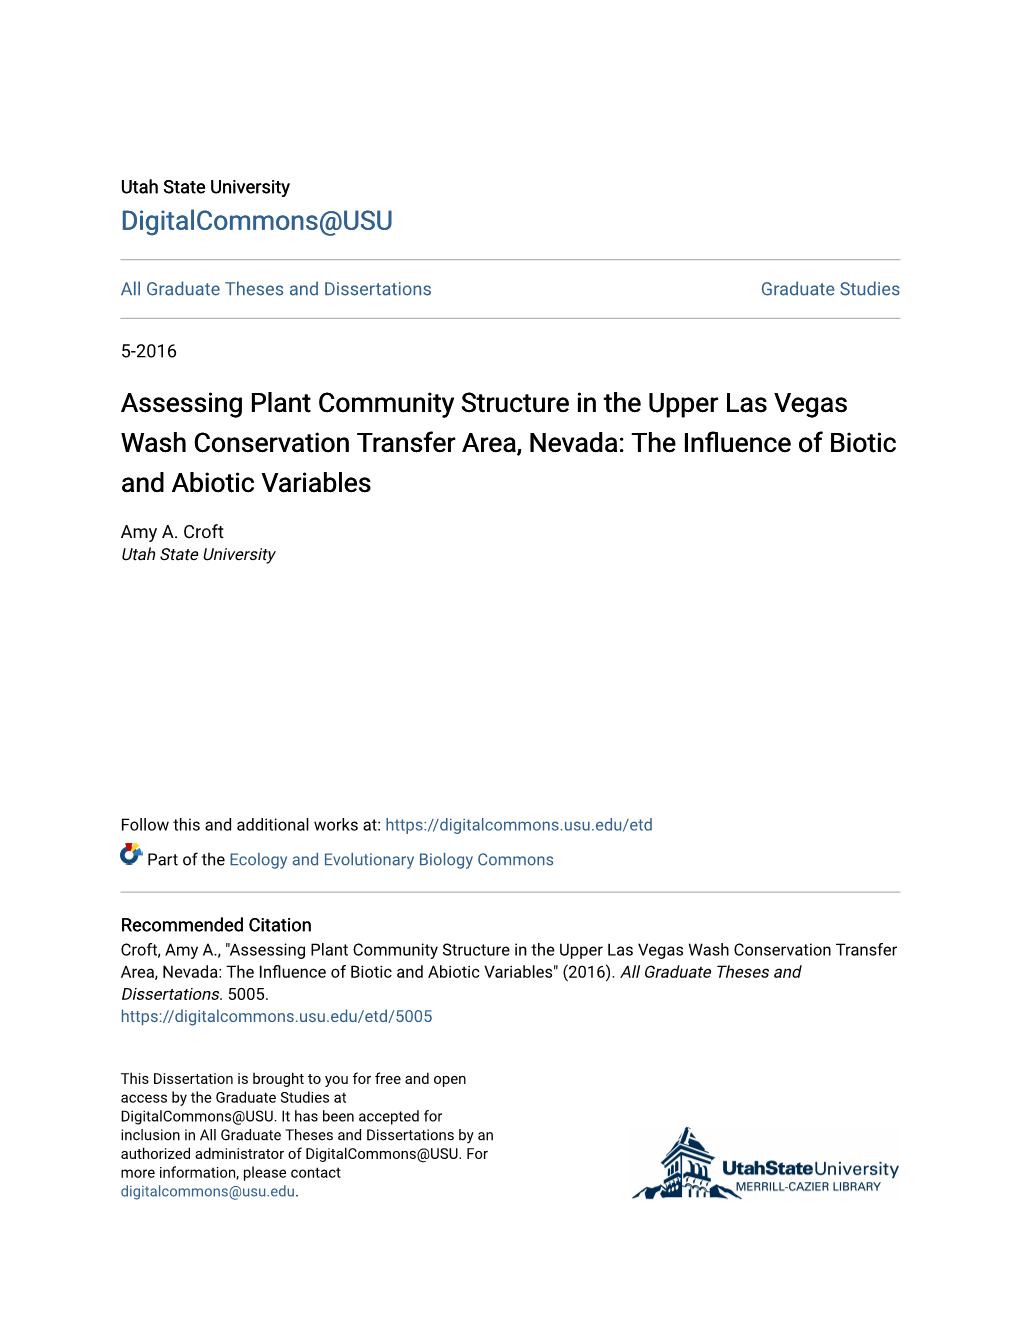 Assessing Plant Community Structure in the Upper Las Vegas Wash Conservation Transfer Area, Nevada: the Influence of Biotic and Abiotic Variables